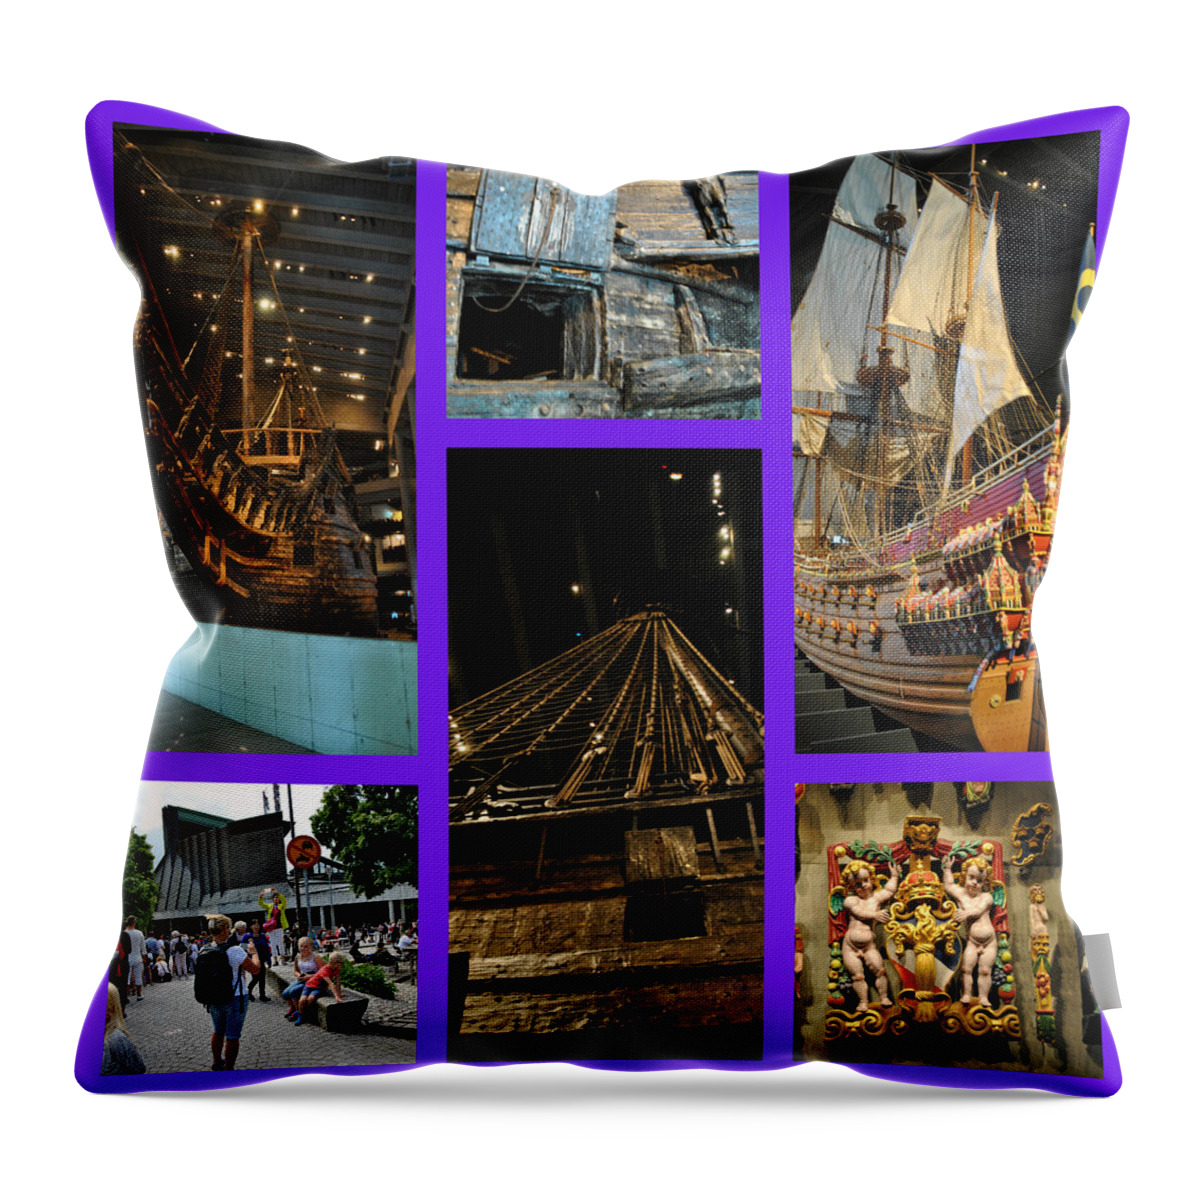 Sweden Throw Pillow featuring the photograph Viking Ship Museum - Stockholm by Jacqueline M Lewis